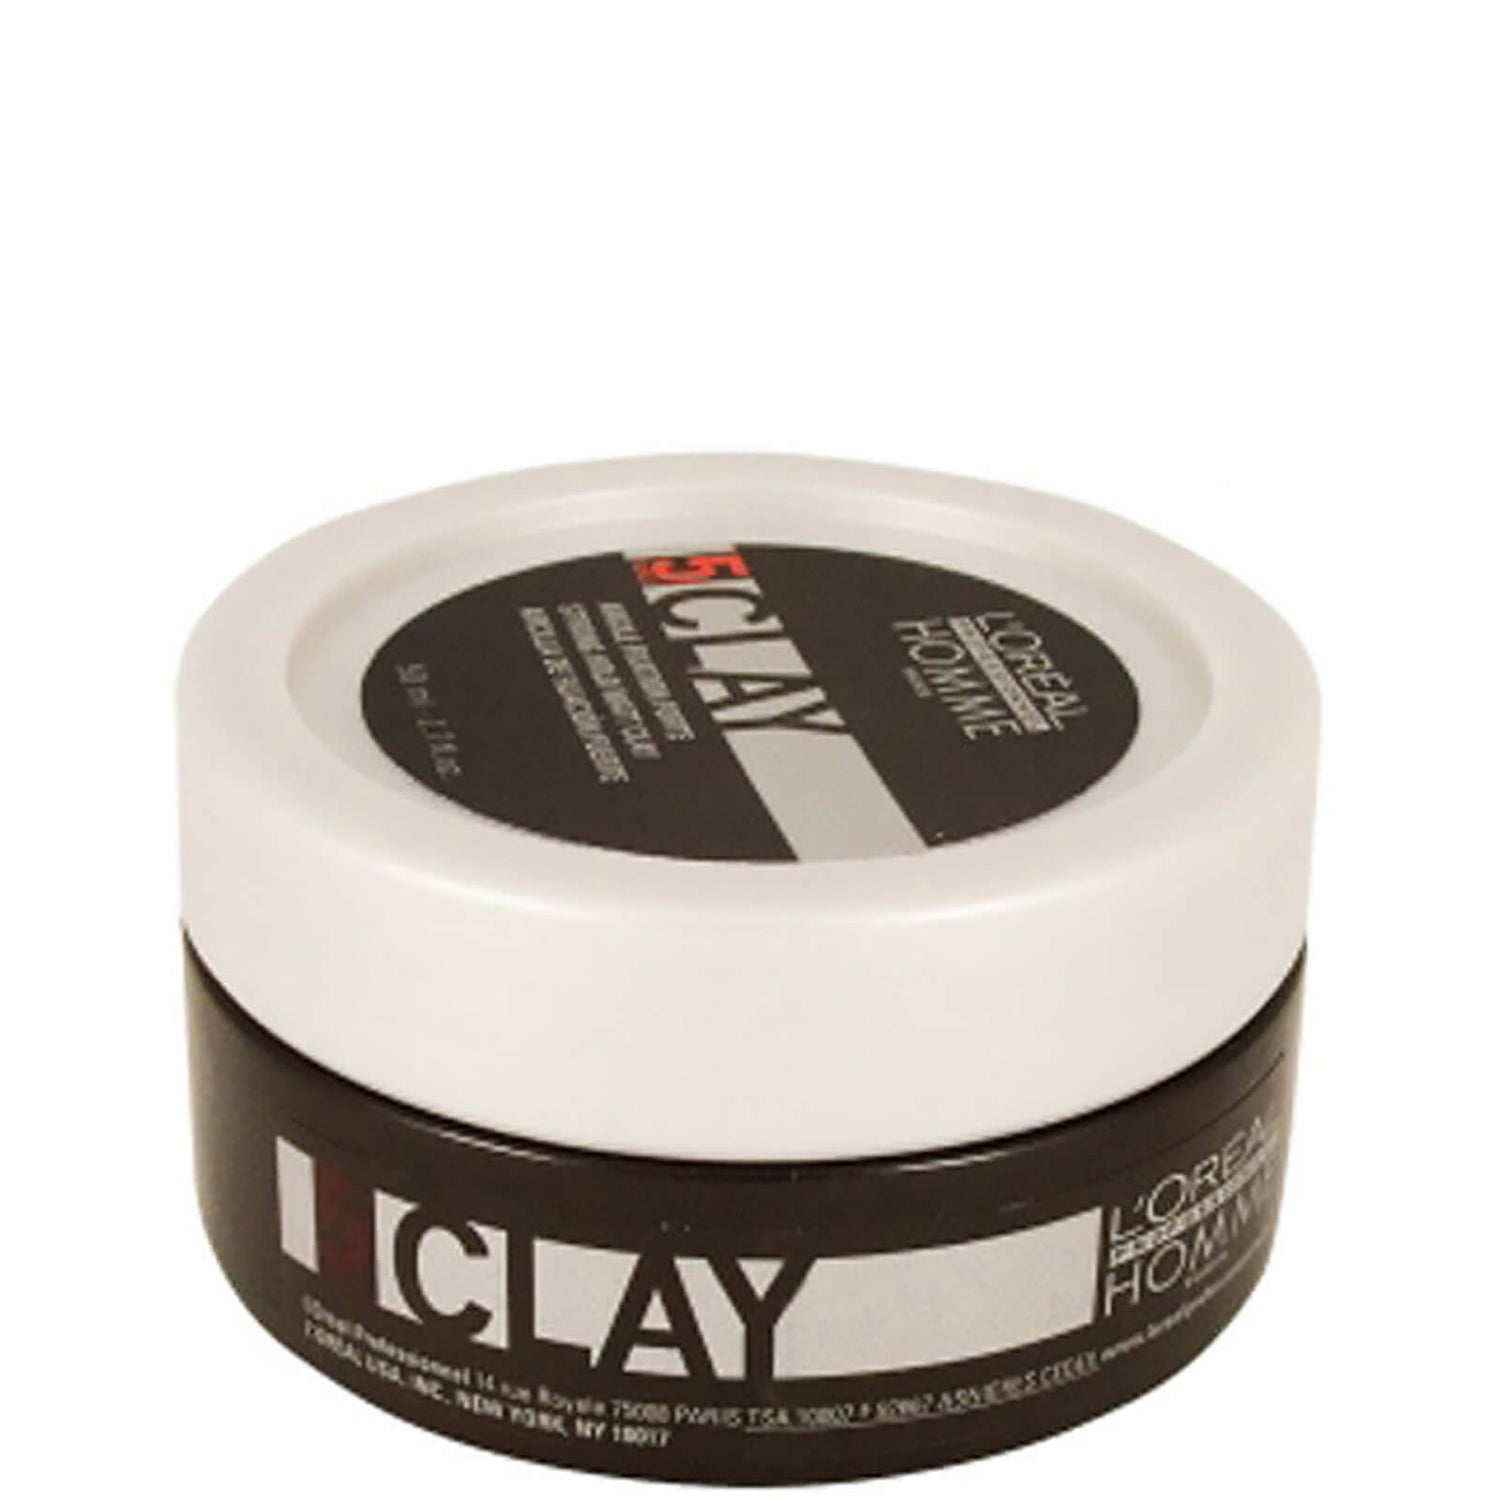 L'Oréal Professionnel Homme Clay - Strong Hold Clay (50ml)